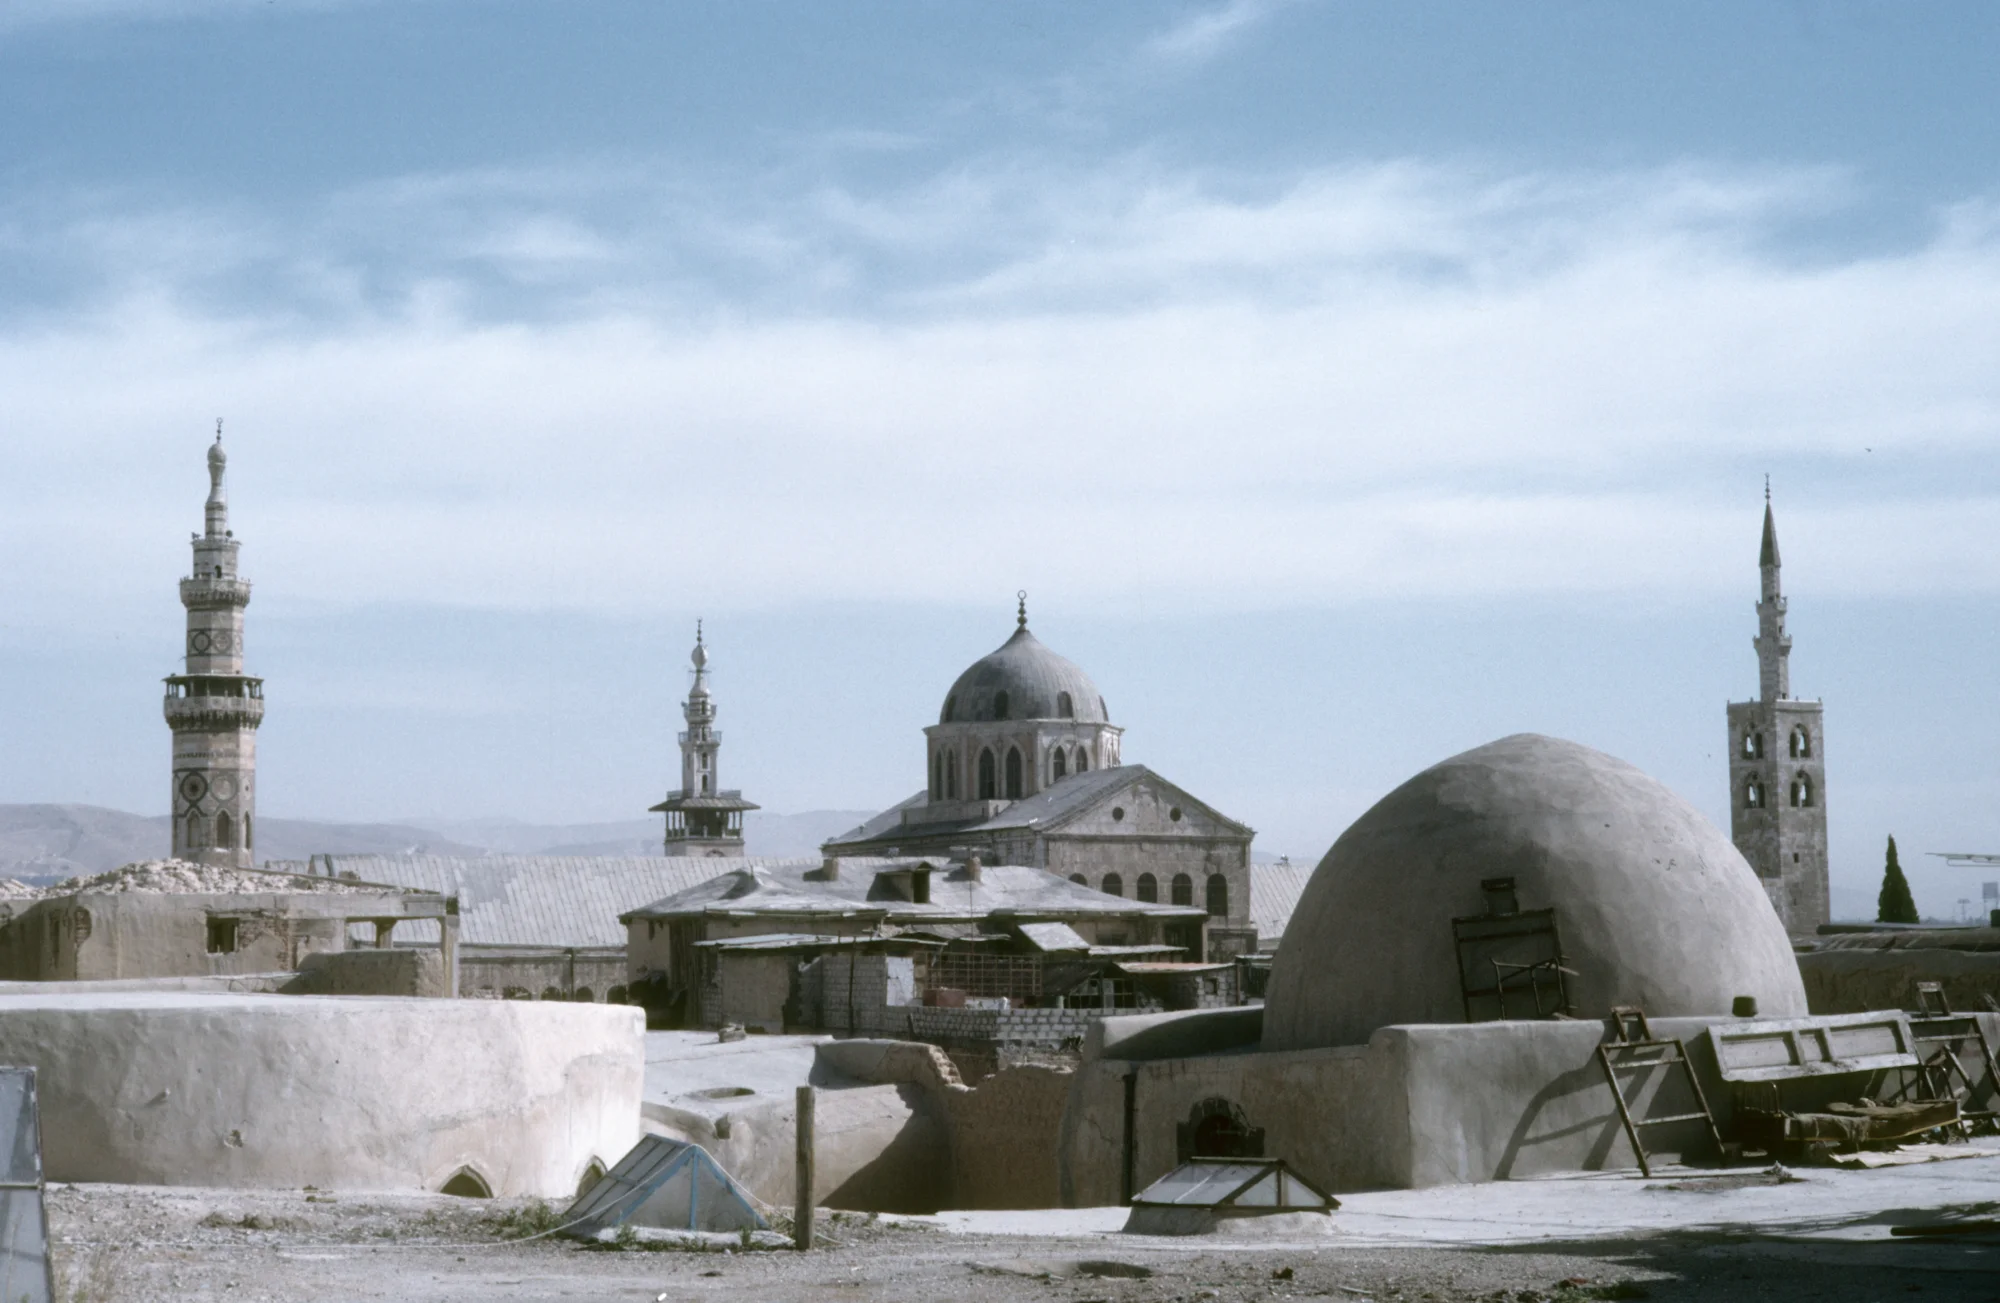 View over the roof of the south-western Madrasat Ismaʿil Basha al-ʿAzm to the Umayyad Mosque with its high transept of the prayer hall with a central dome and its three minarets